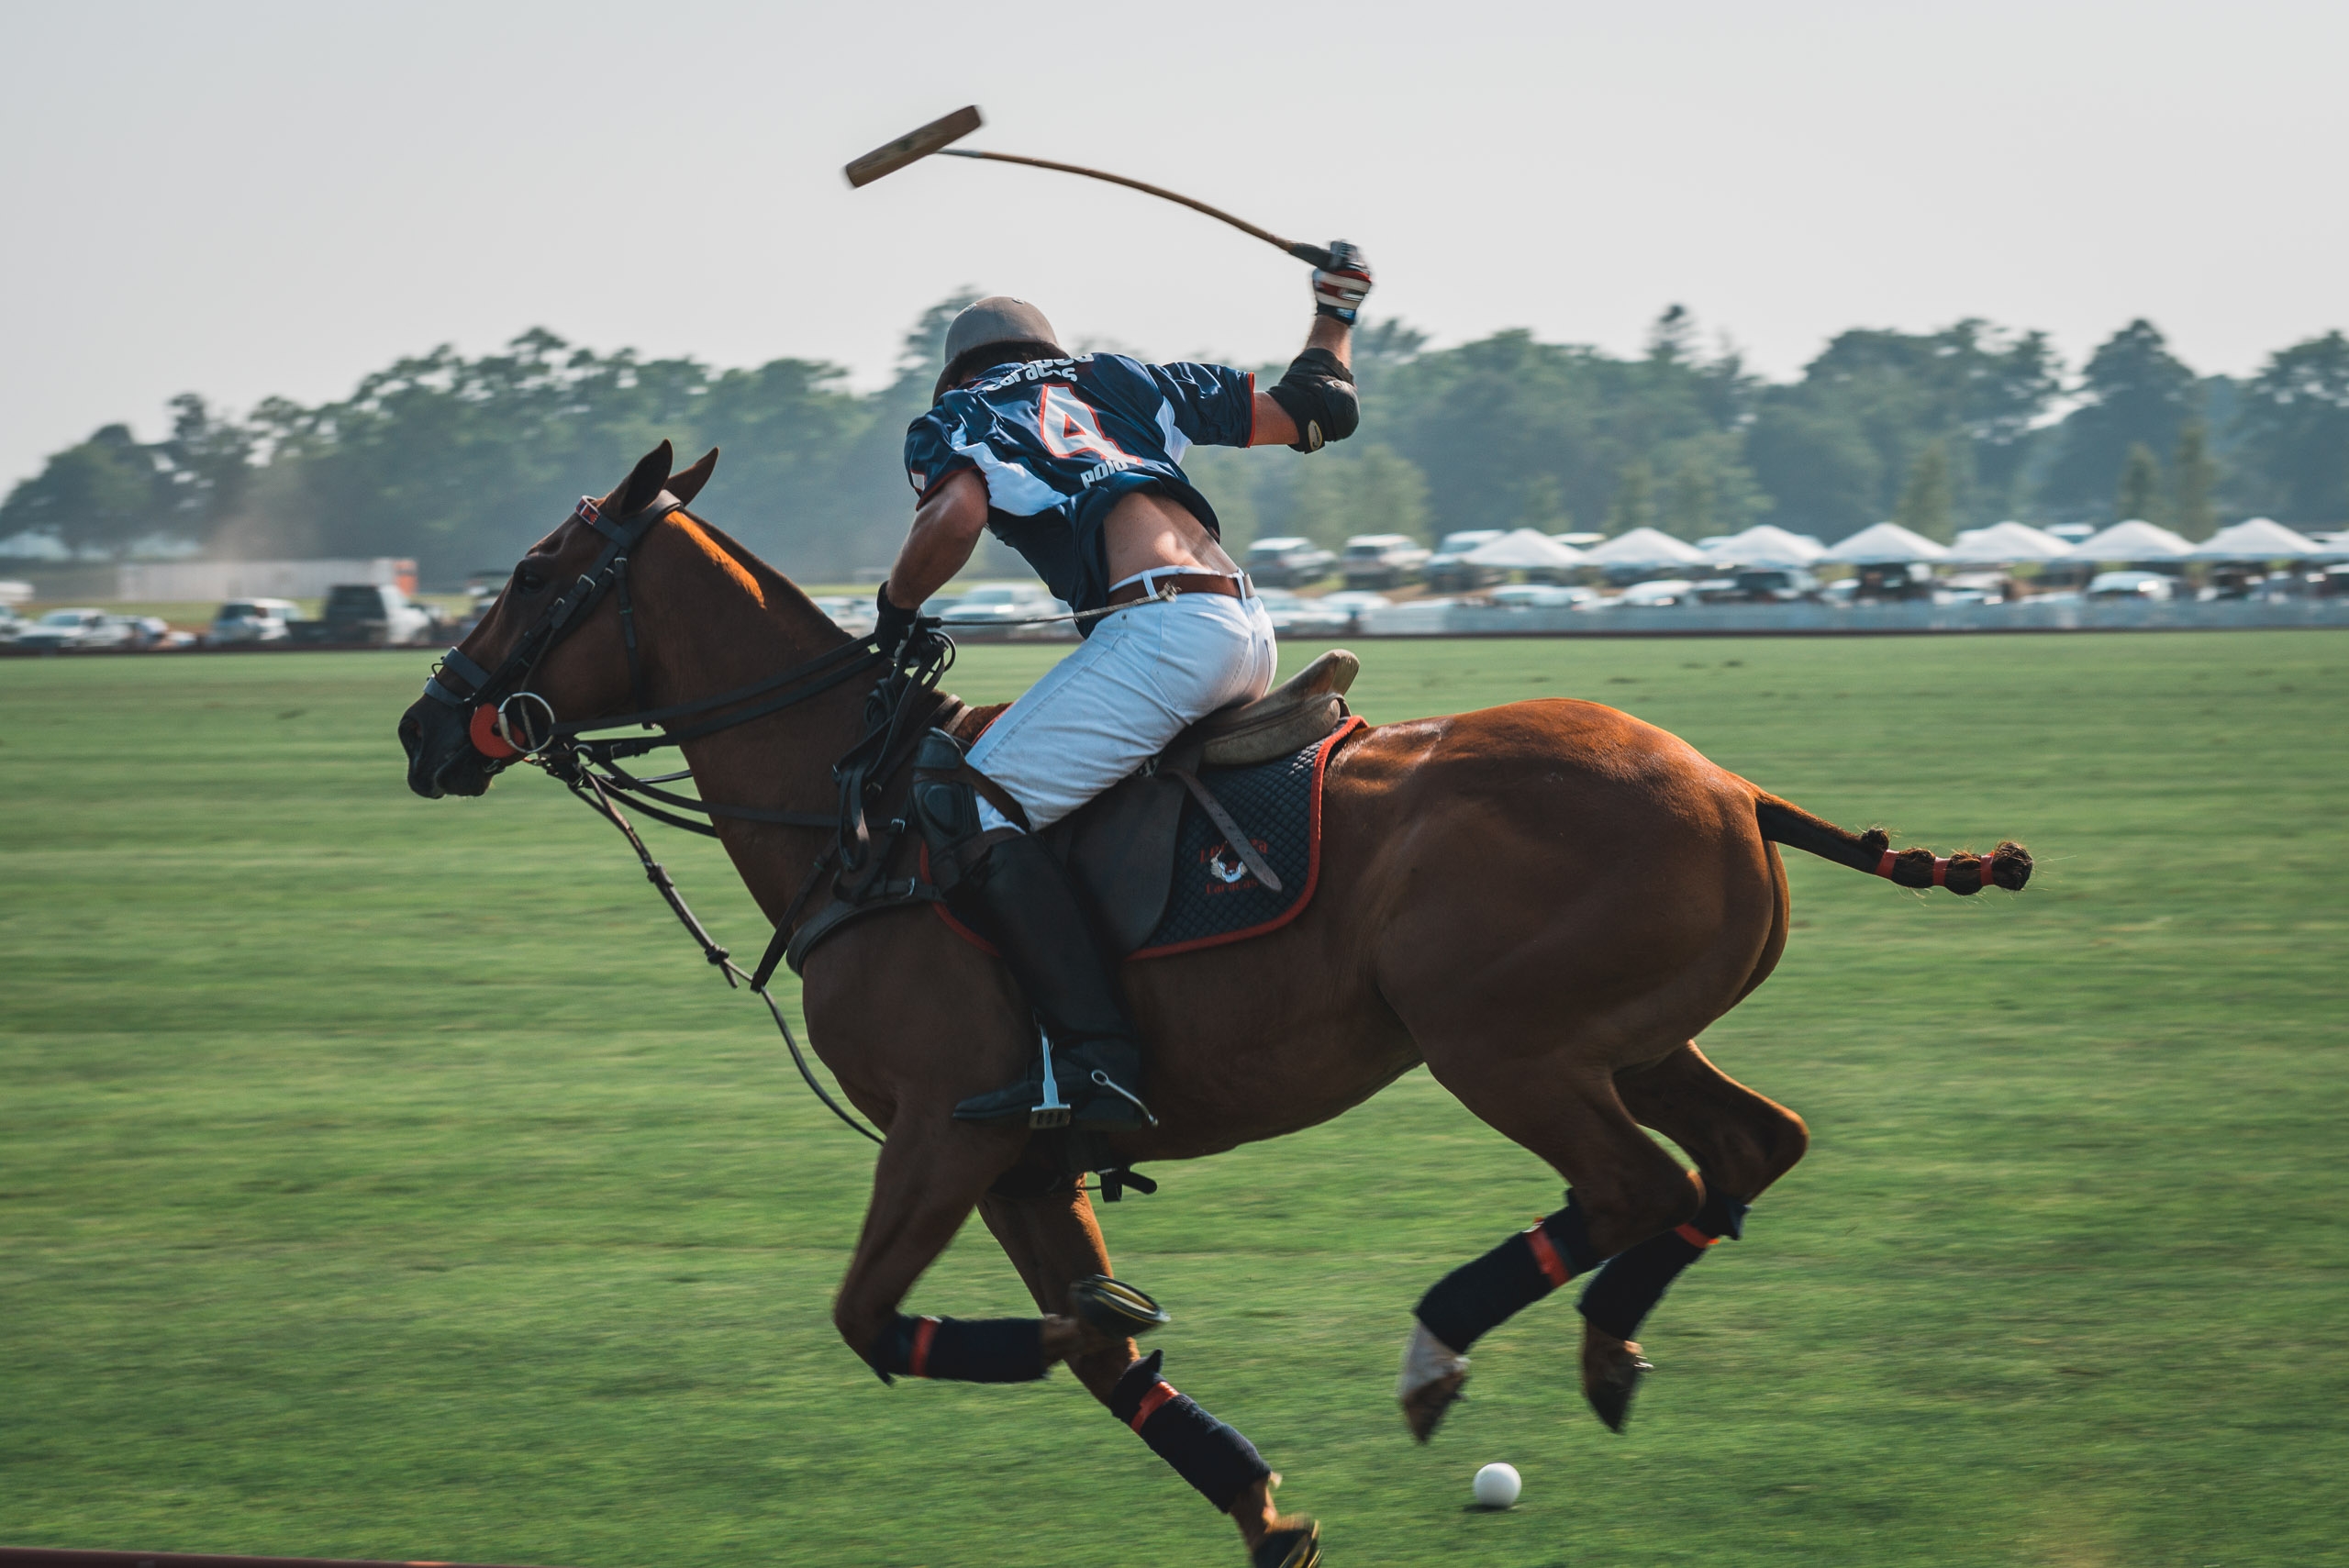 Polo at Full Speed